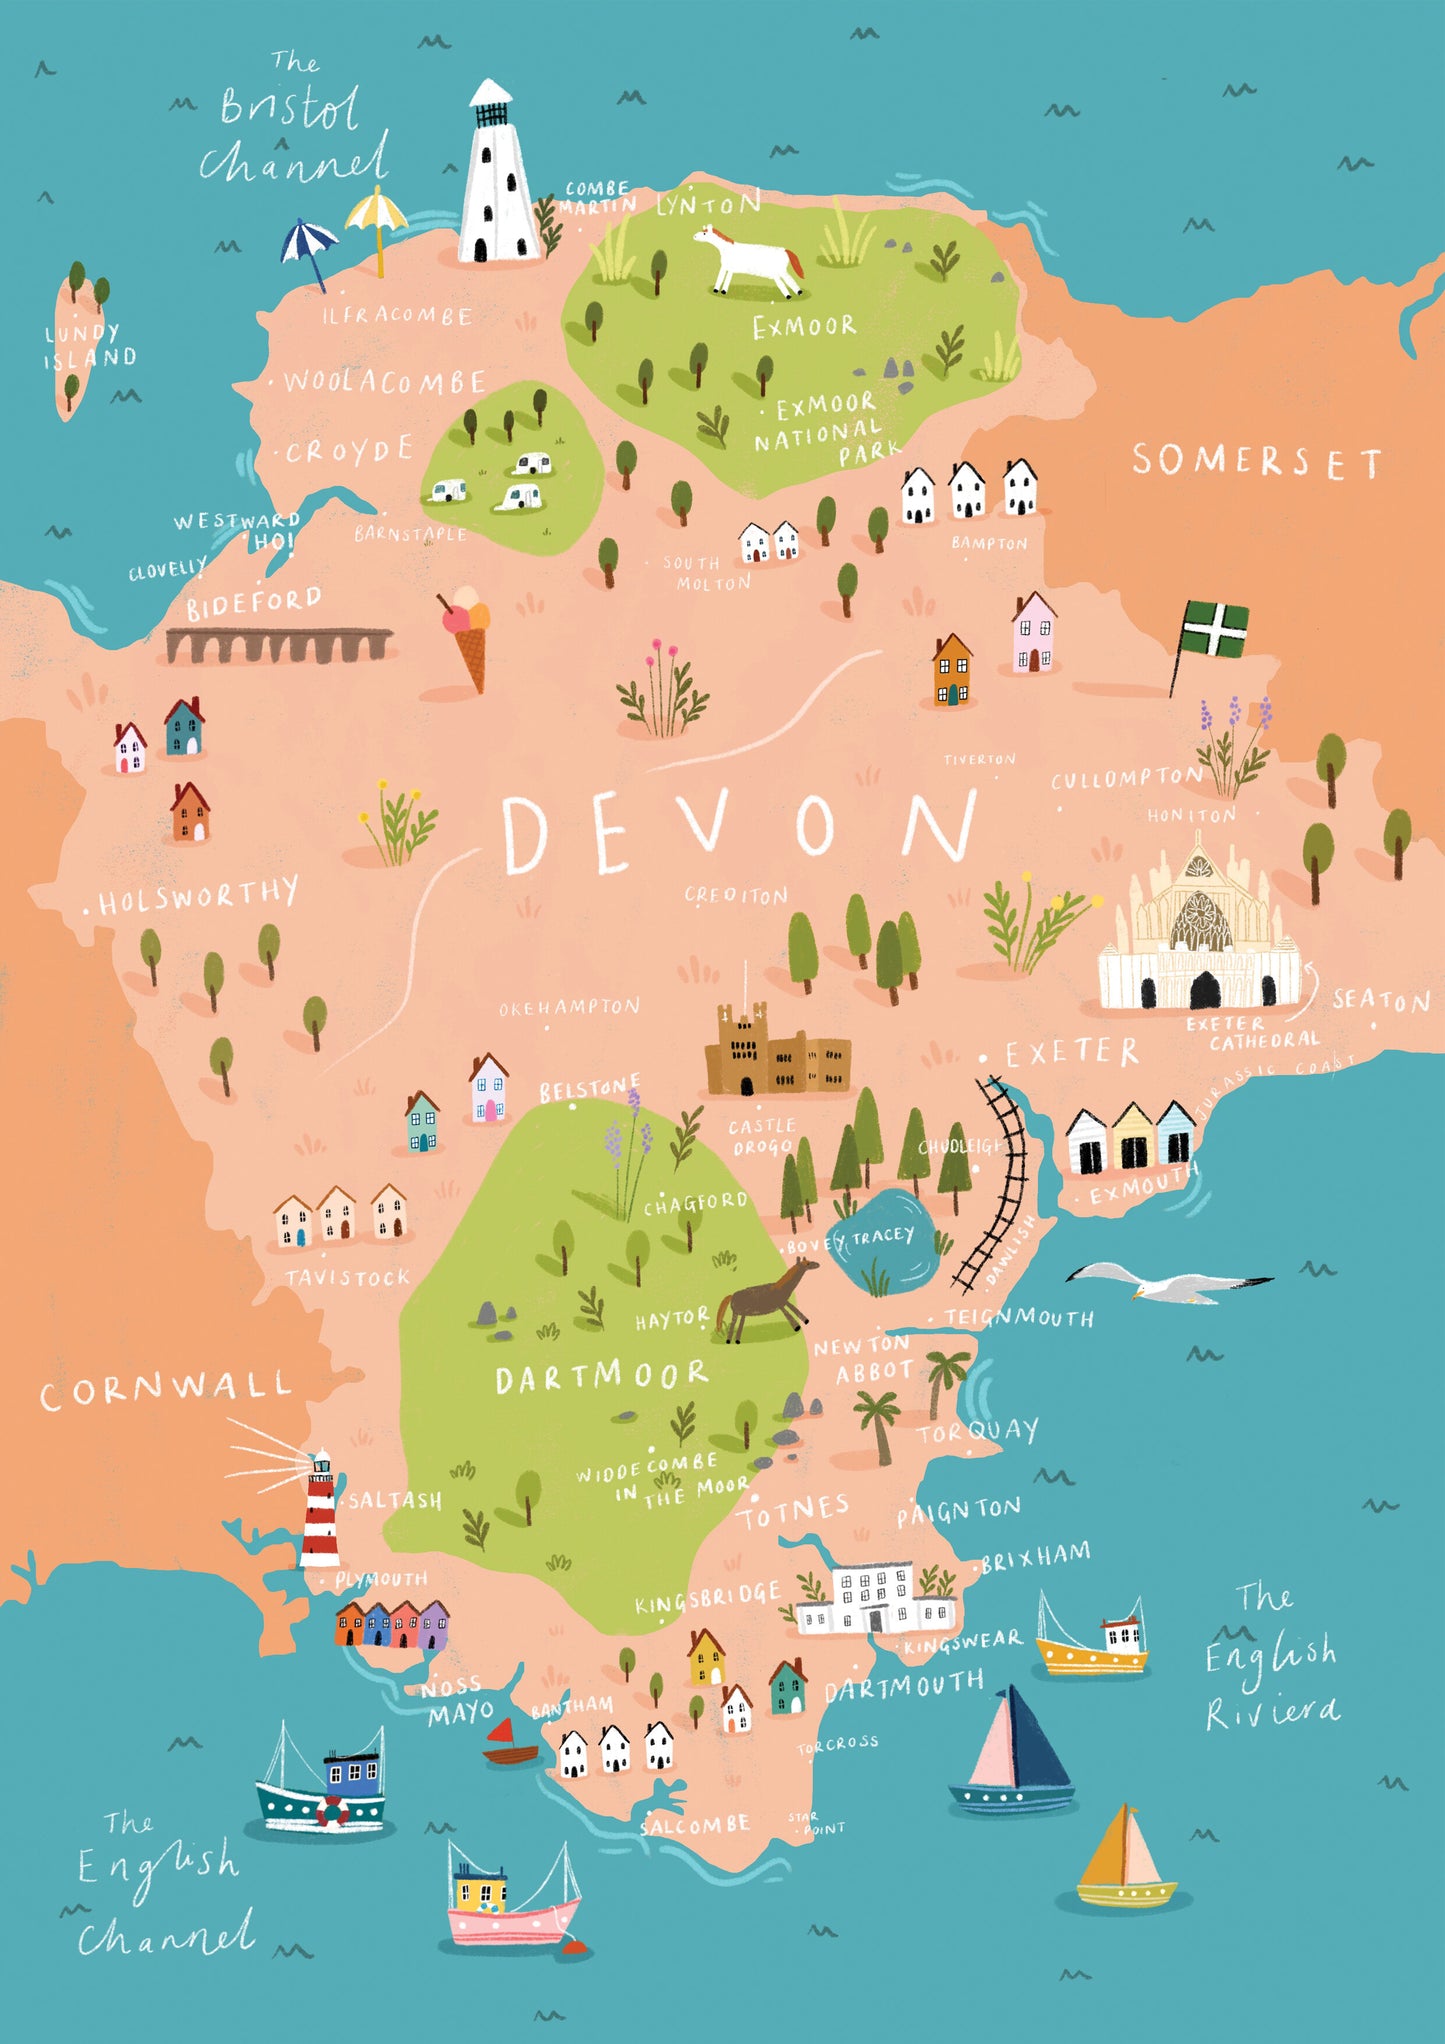 illustrated map of Devon, with all major landmarks and labels of places, written in the middle is 'Devon' in white. The background is teal for the sea with boats, surfers and seagulls.